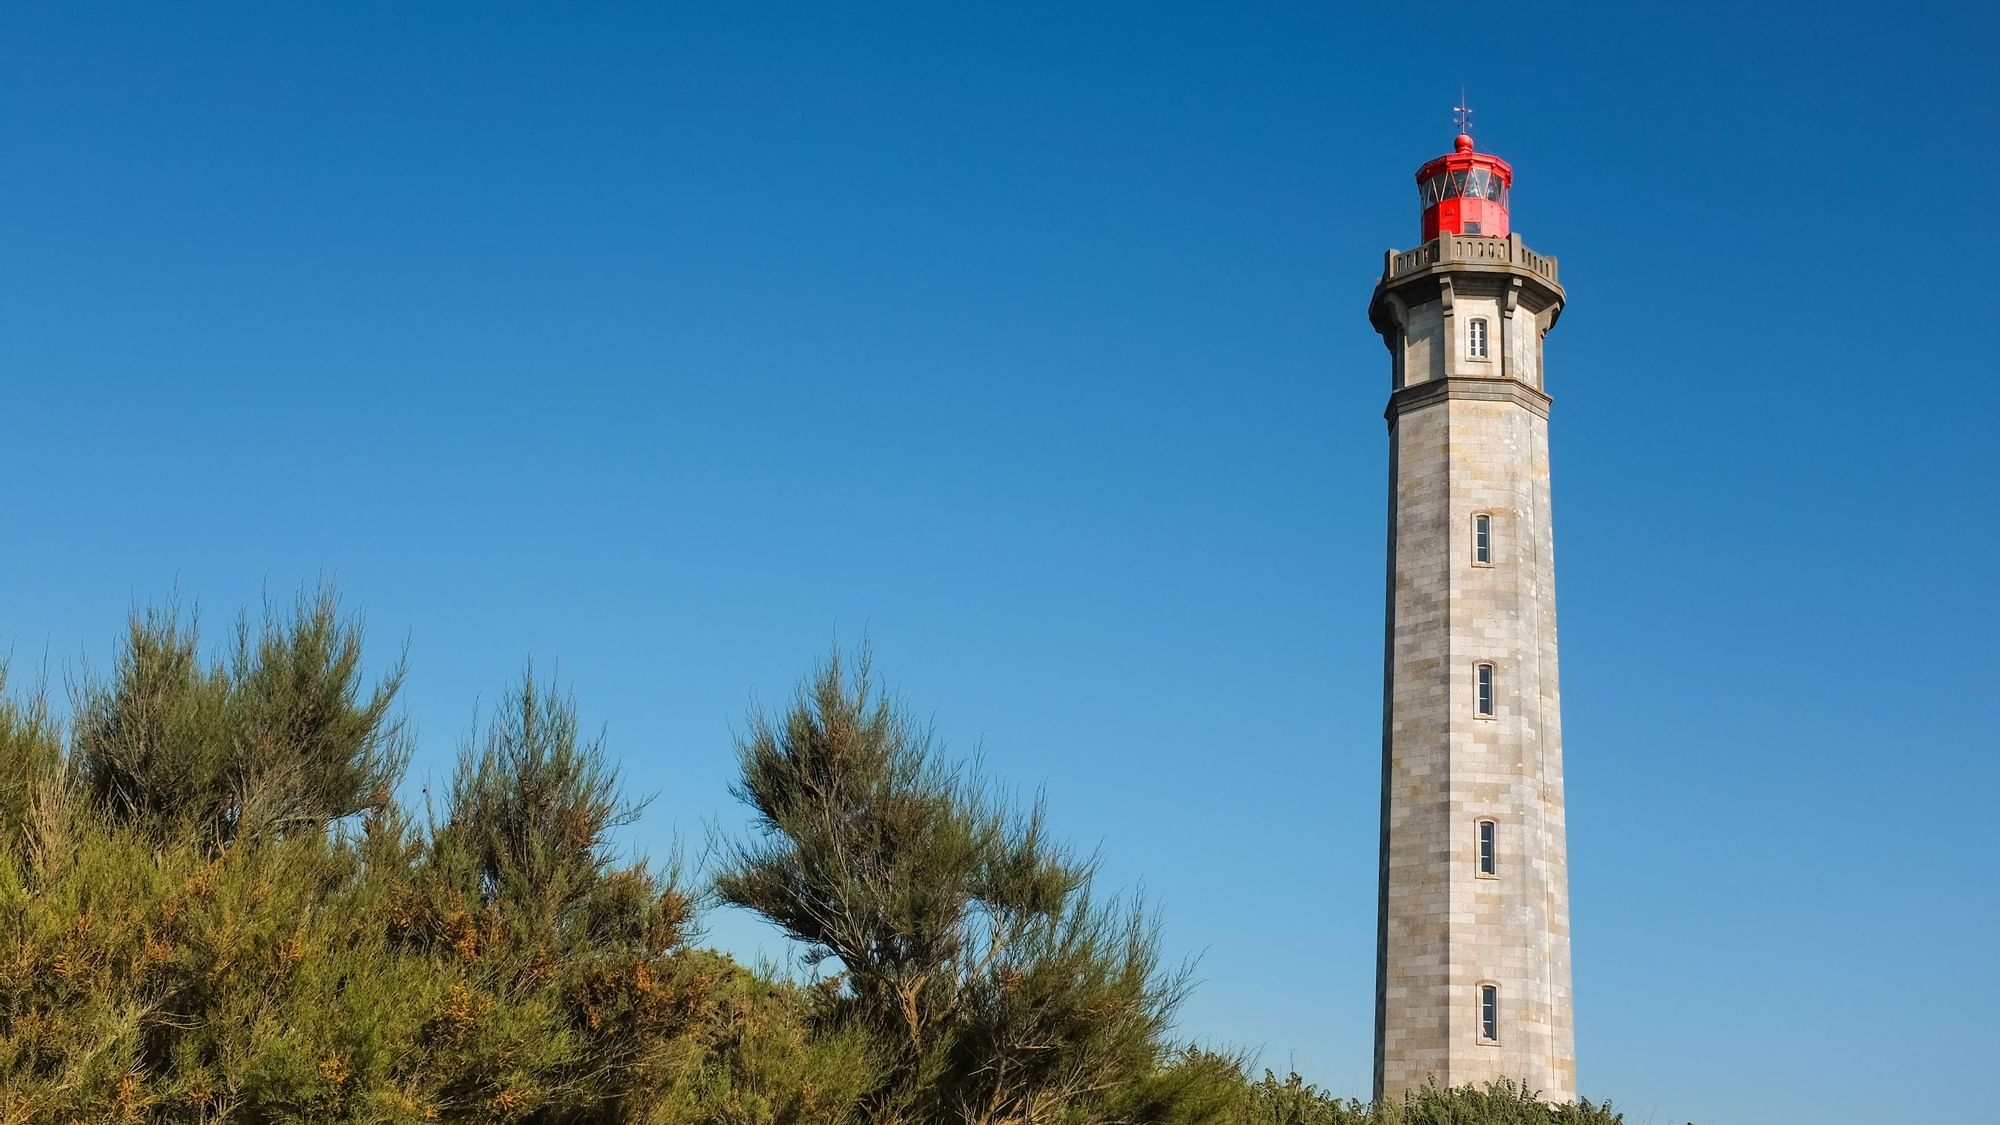 View of Phare Des Baleines Lighthouse near the Originals Hotels